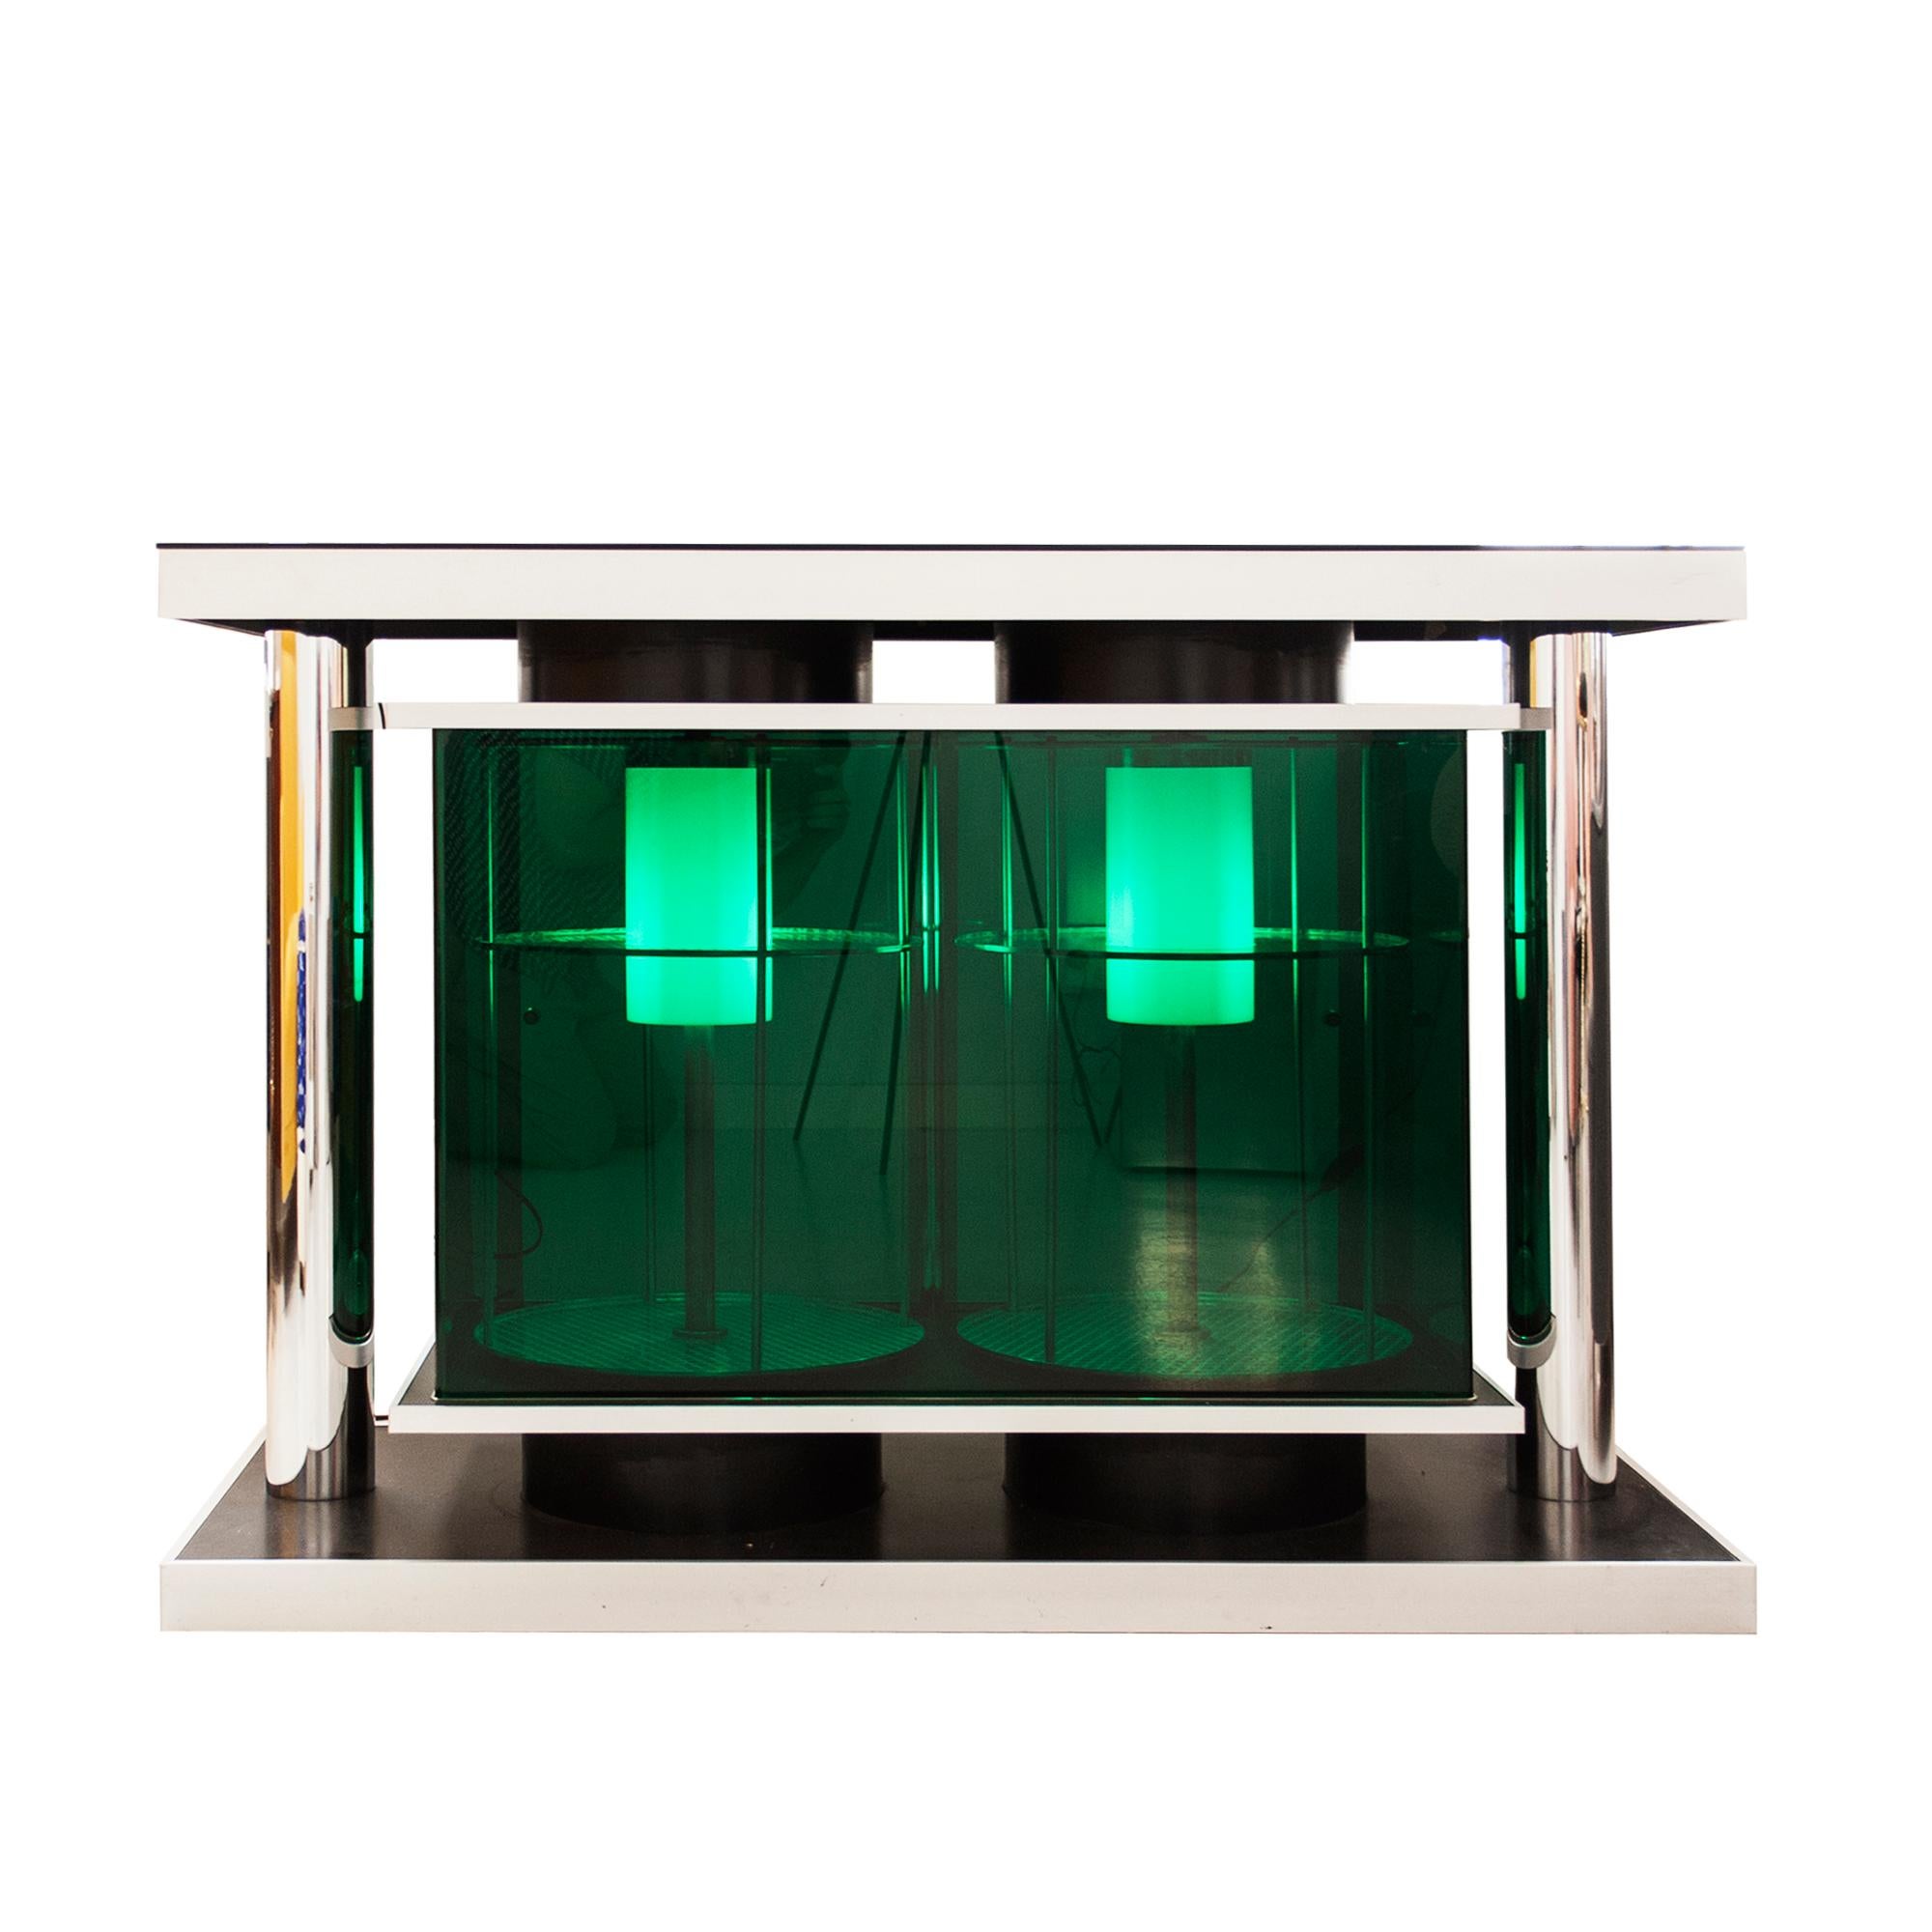 Italian dry bar composed of a wooden structure with perplex green screen and chromed steel details. Interior with revolving bottle rack backlit.